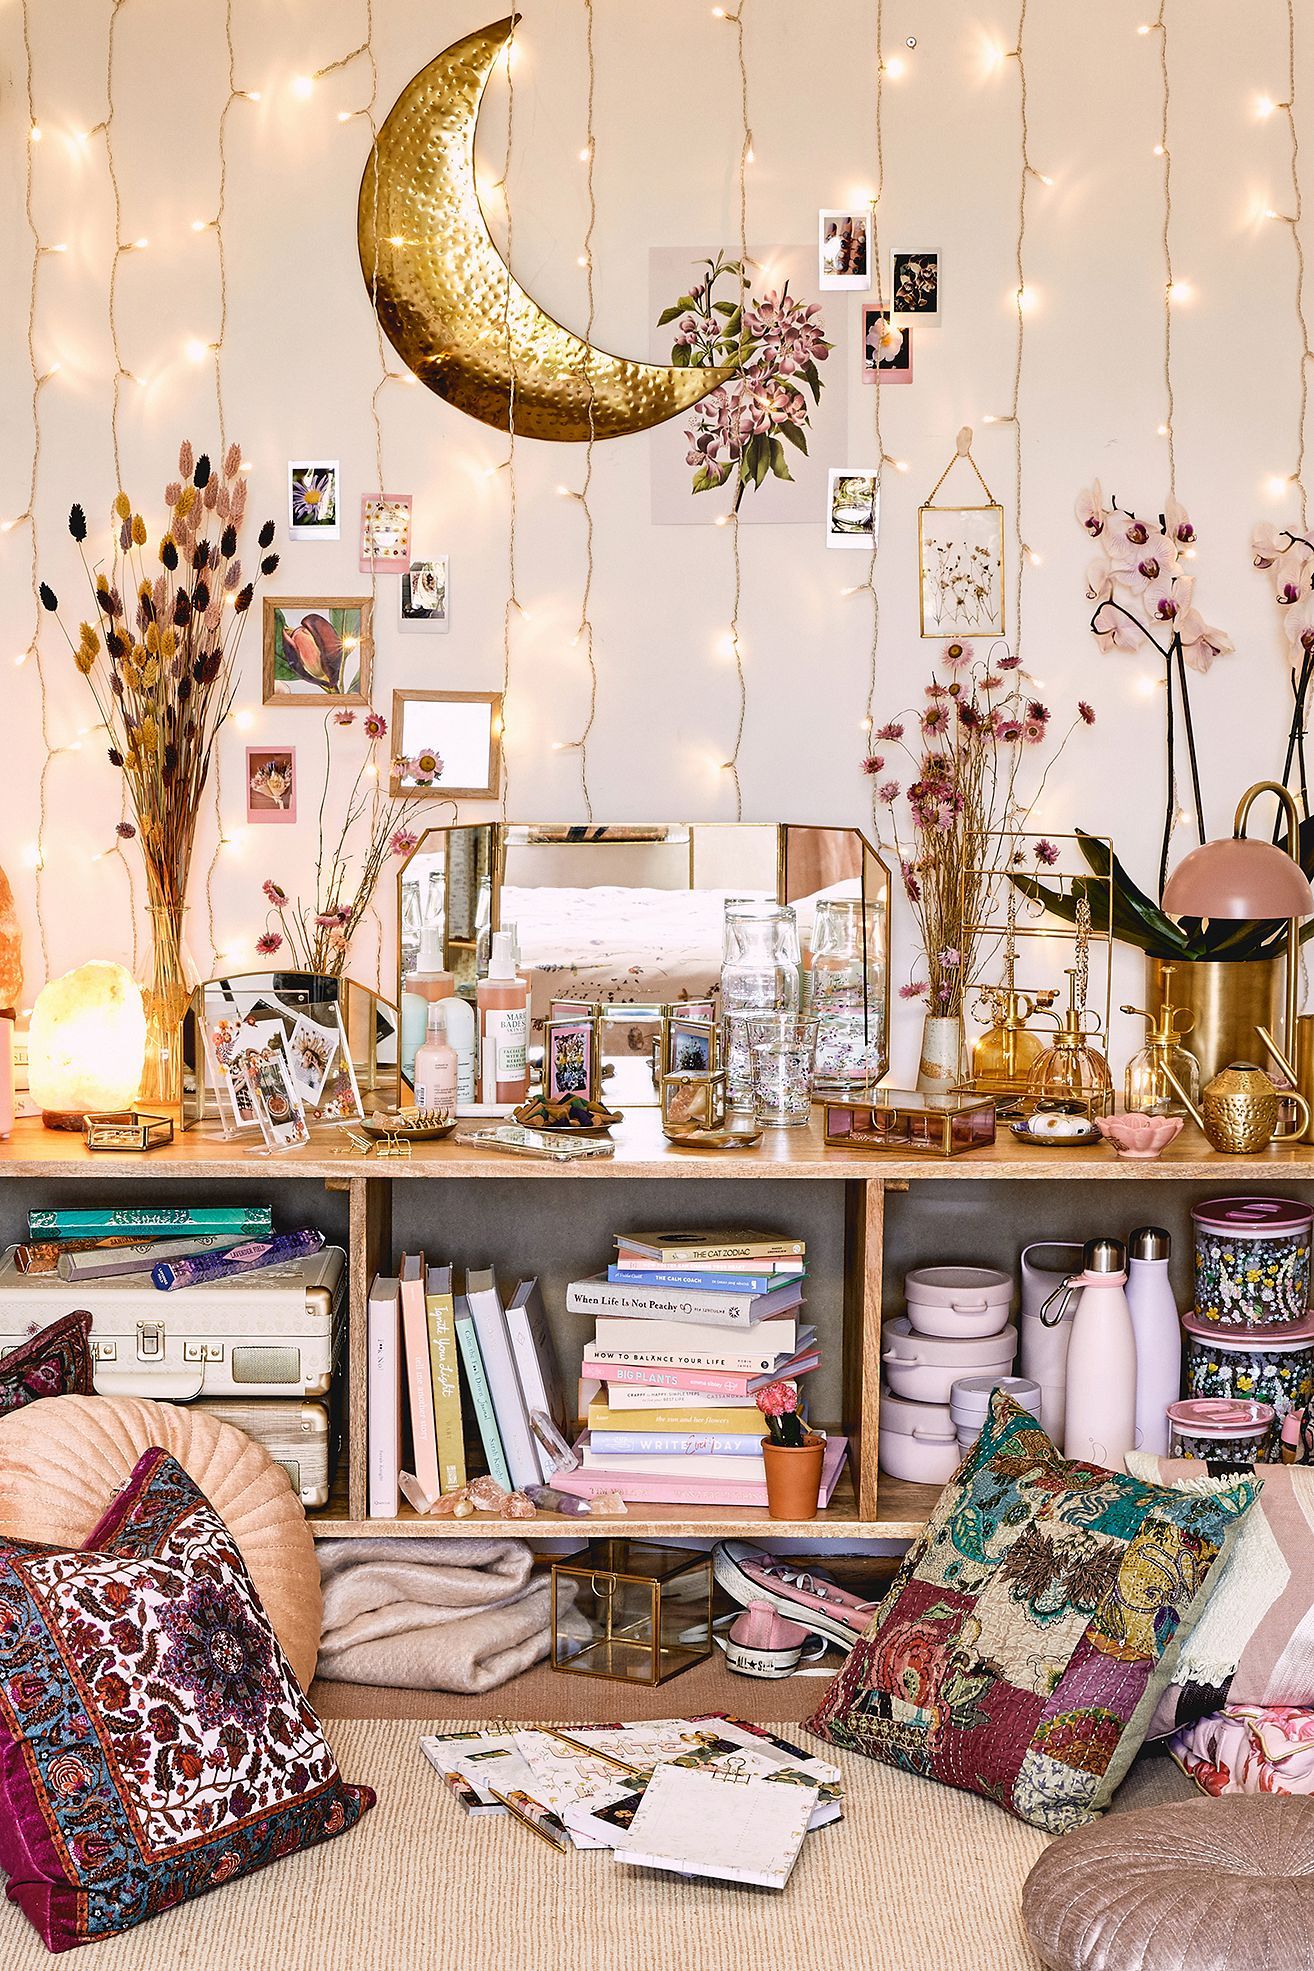 Cluttercore Is The Home Decor Trend That Makes Messy Look Mindful